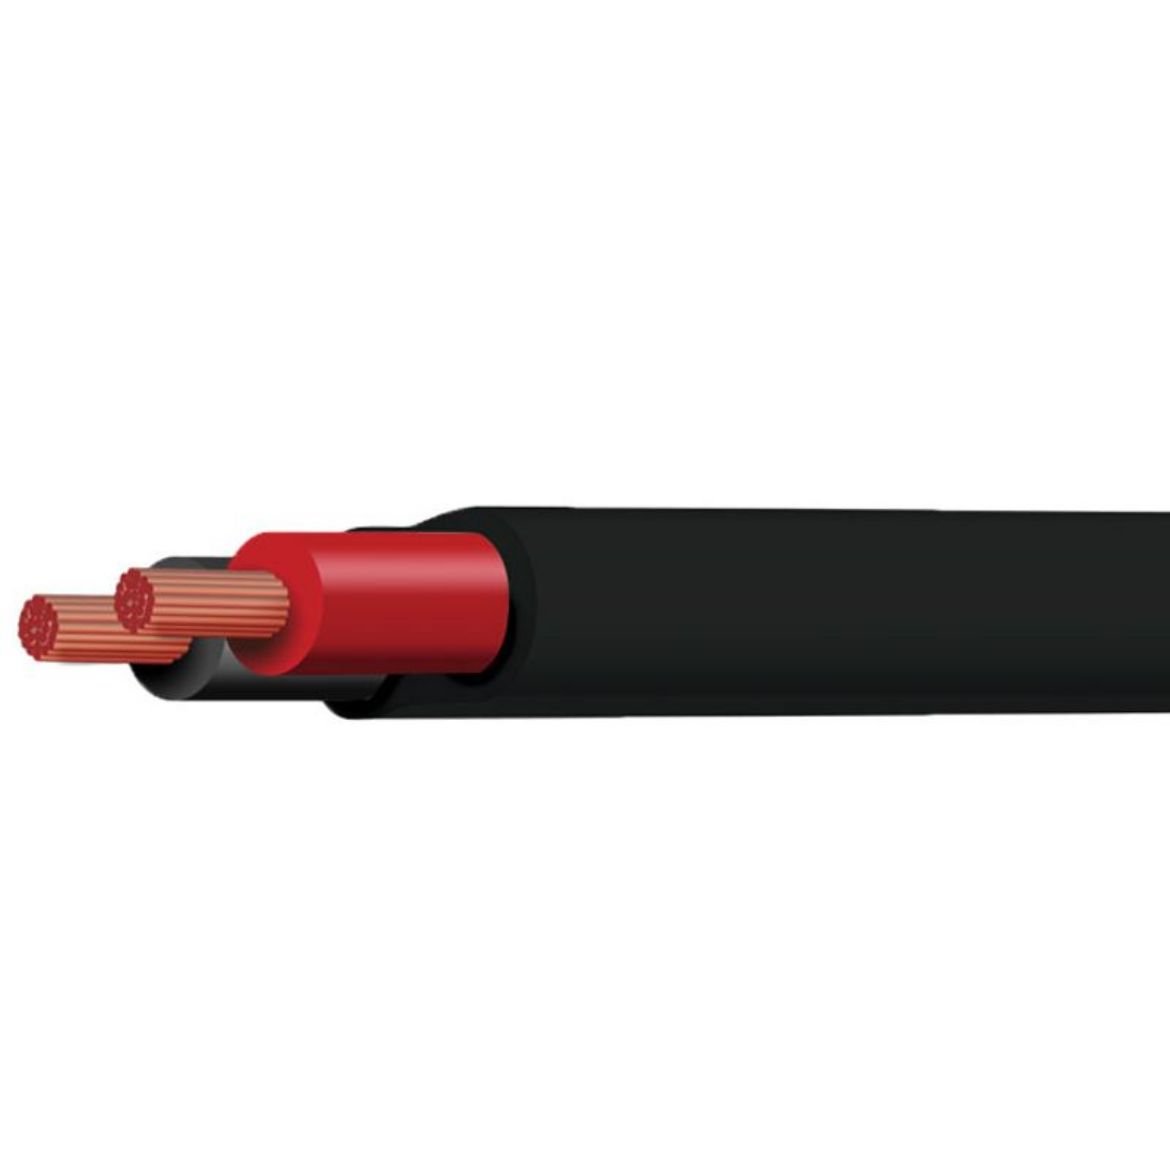 Picture of TYCAB 4MM TWIN CORE CABLE 22A TWIN SHEATH BLACK/RED - 30M ROLL